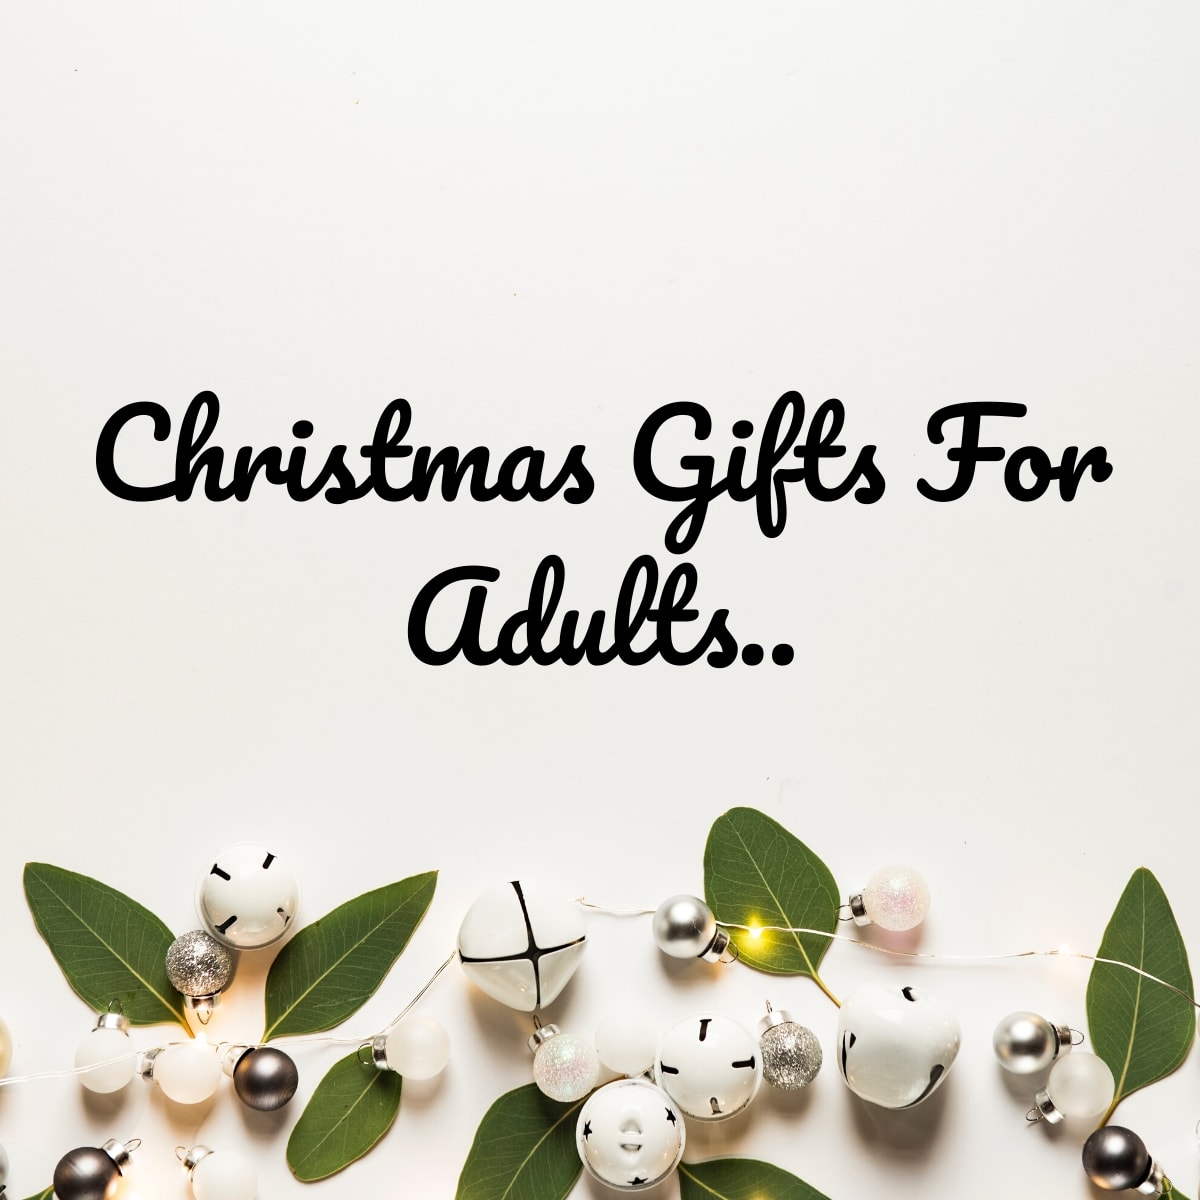 Christmas Gifts for Adults